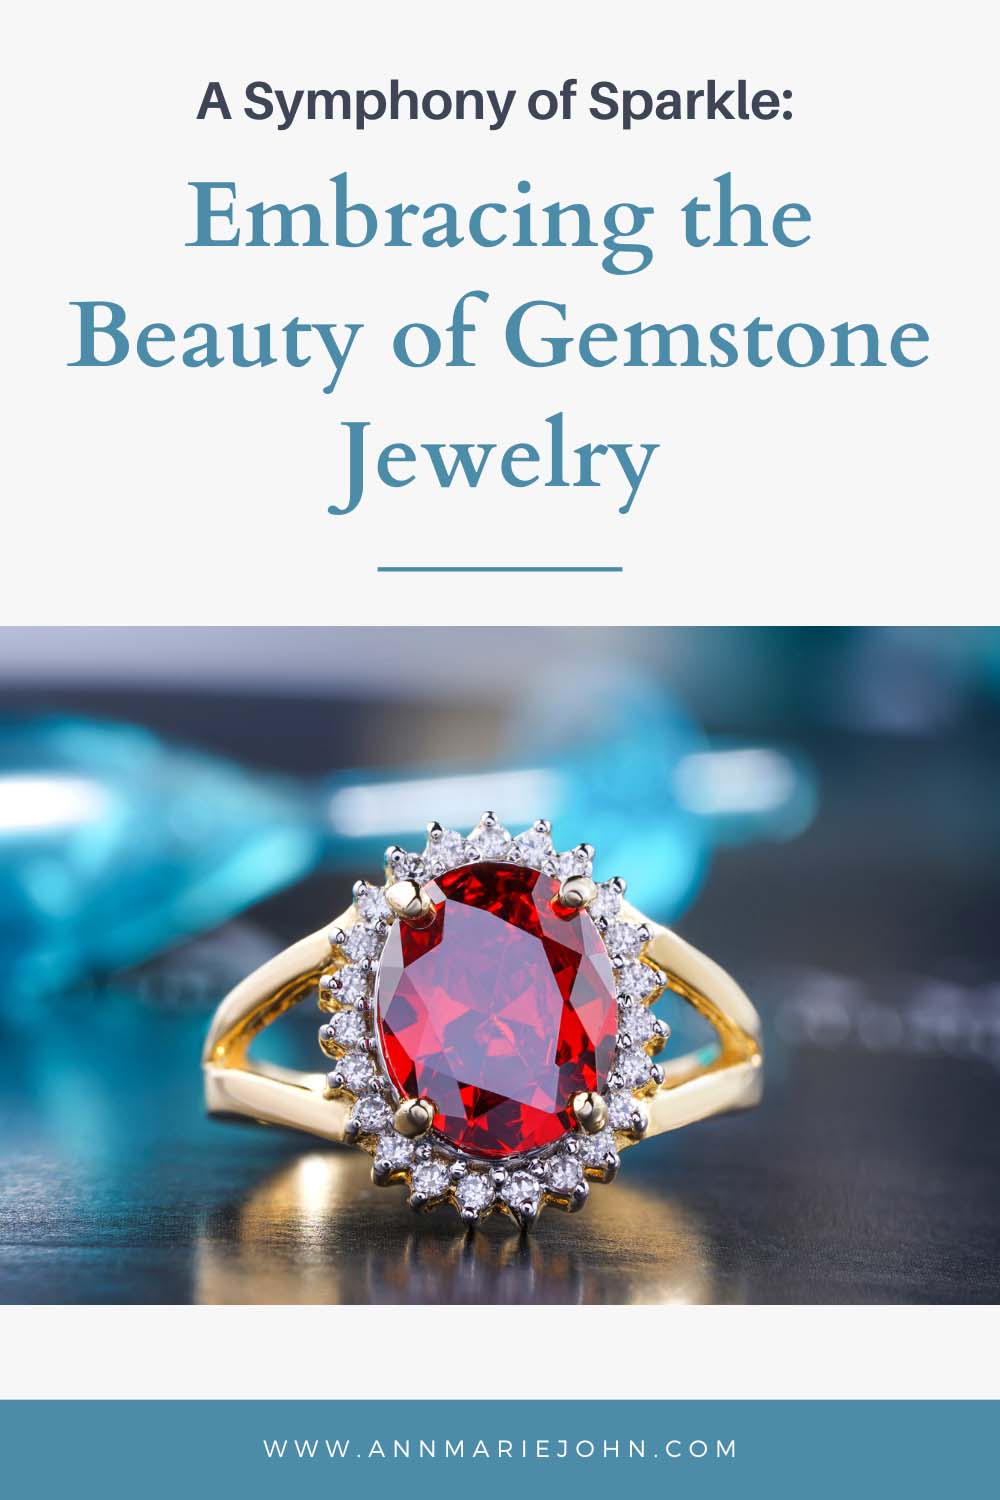 Embracing the Beauty of Gemstone Jewelry